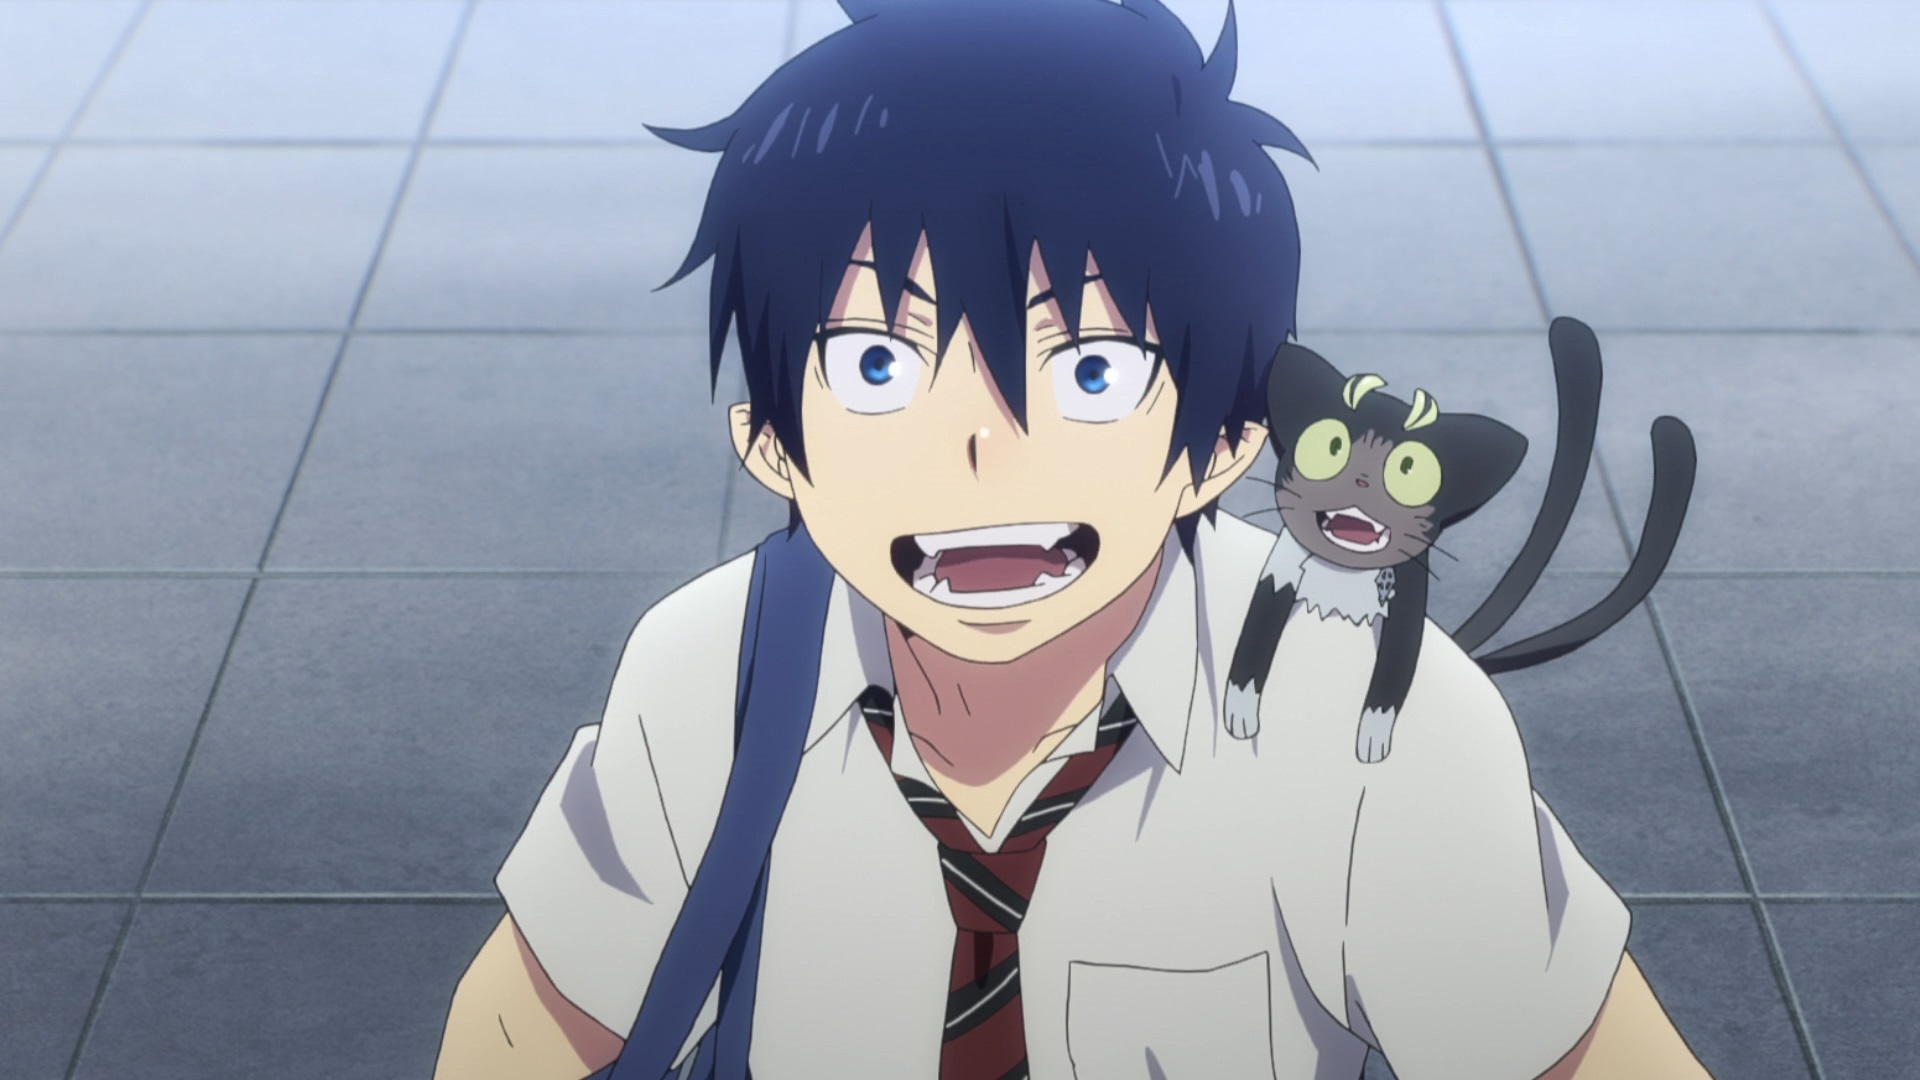 Rin Okumura and his familiar spirit, Kuro, admire the view in as scene from the Kyoto Arc of the Blue Exorcist TV anime.